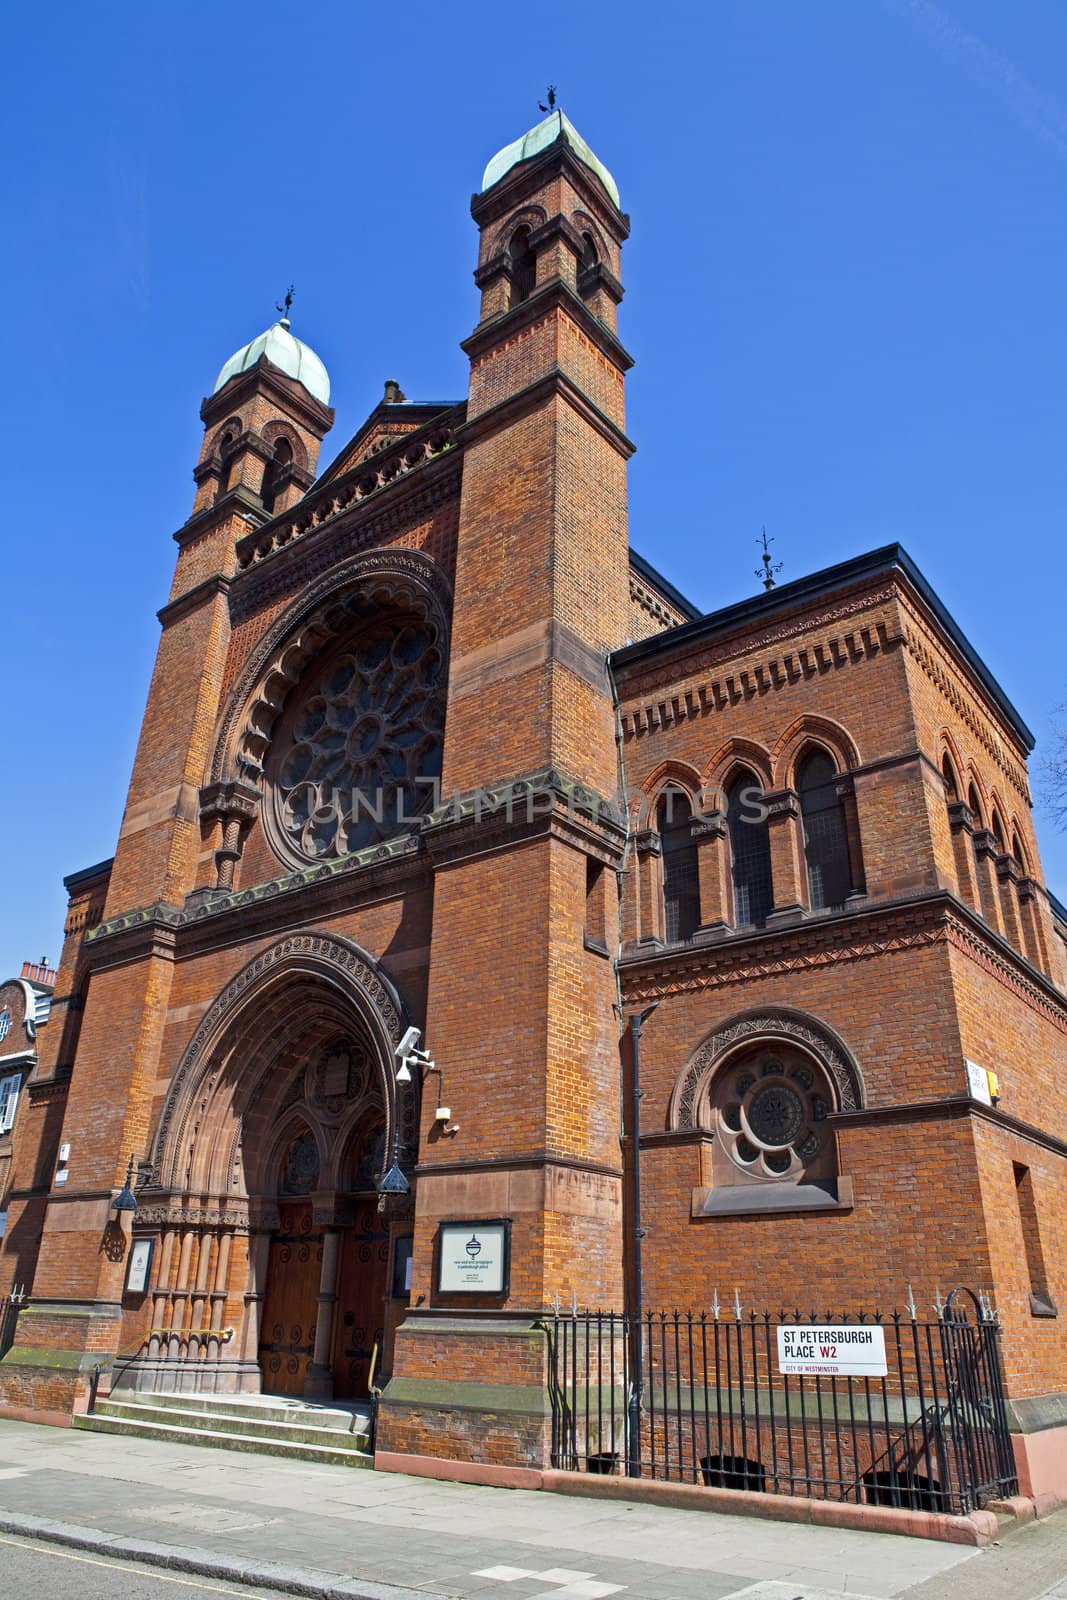 The New West End Synagogue located in St. Petersburg Place, London.